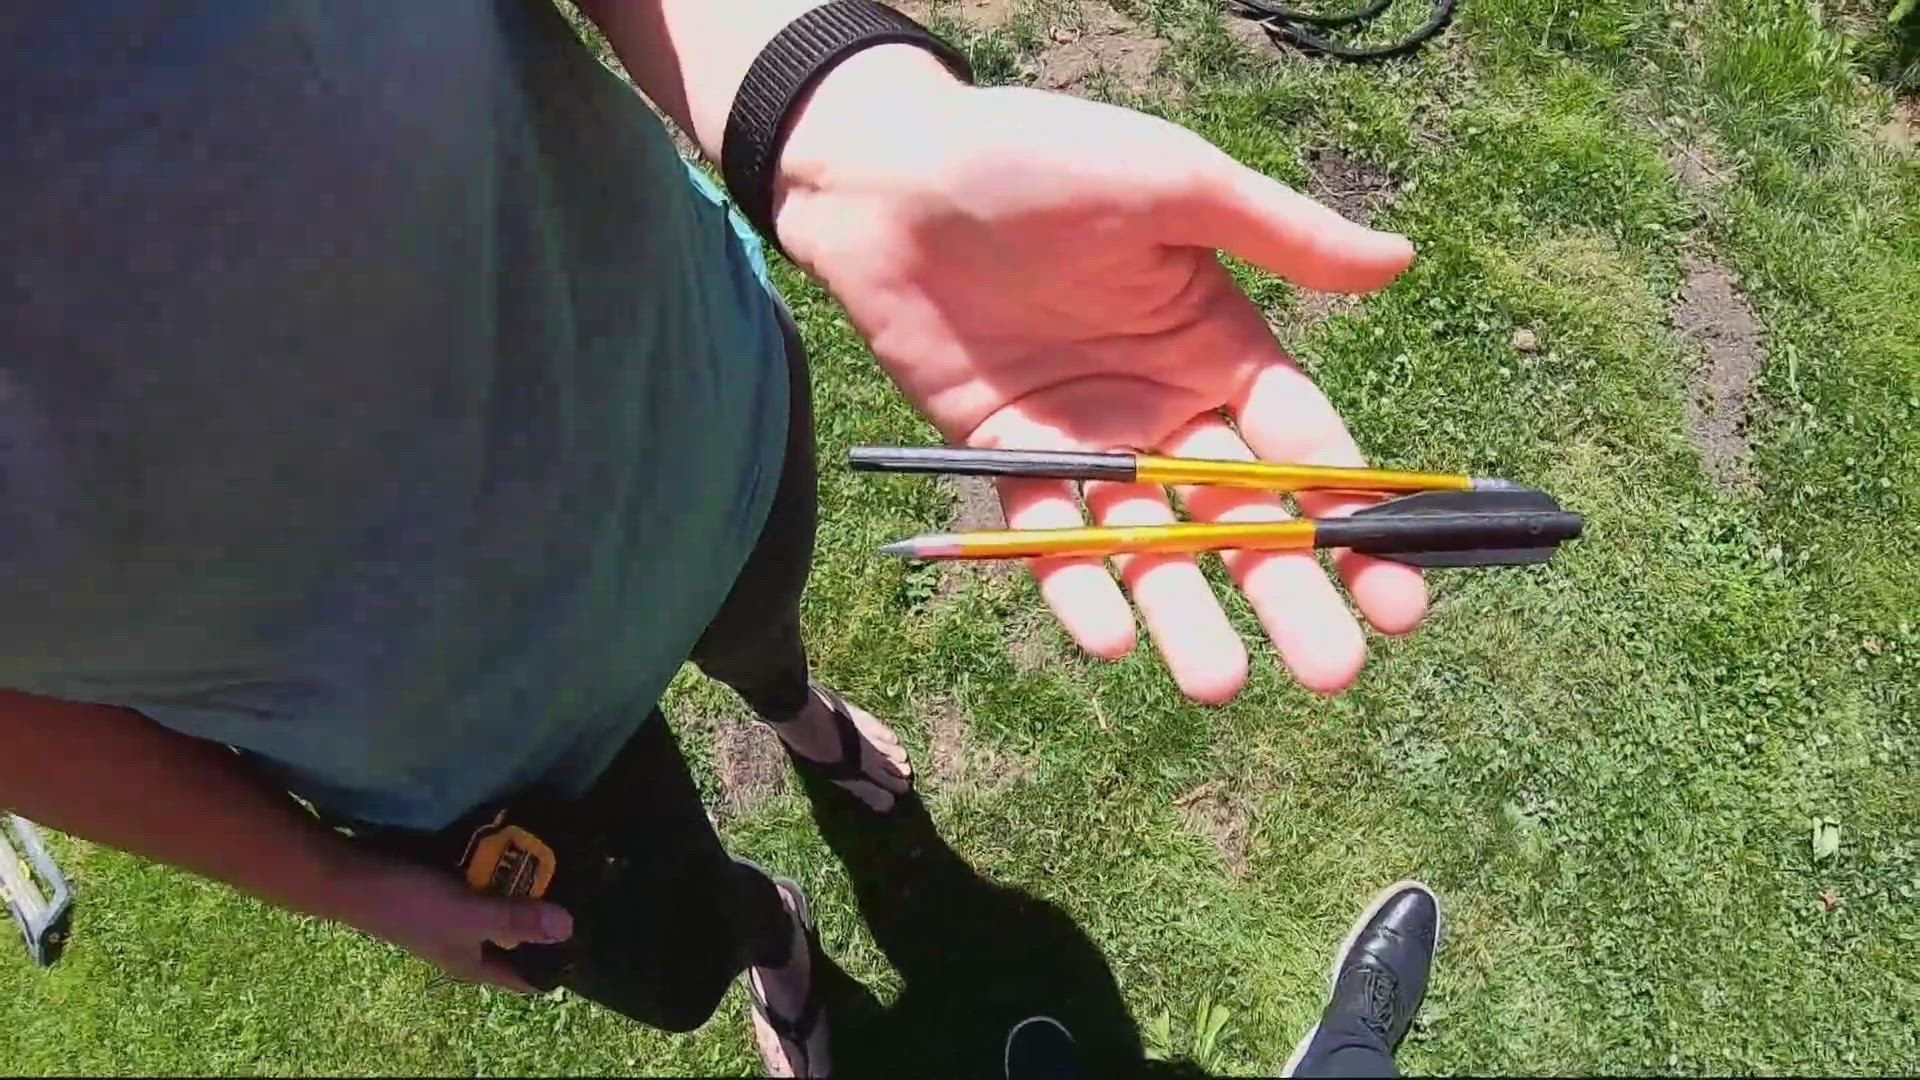 For the third time in a year, a Troutdale woman has found more crossbow darts in her yard, and she's told there's nothing officials can do.